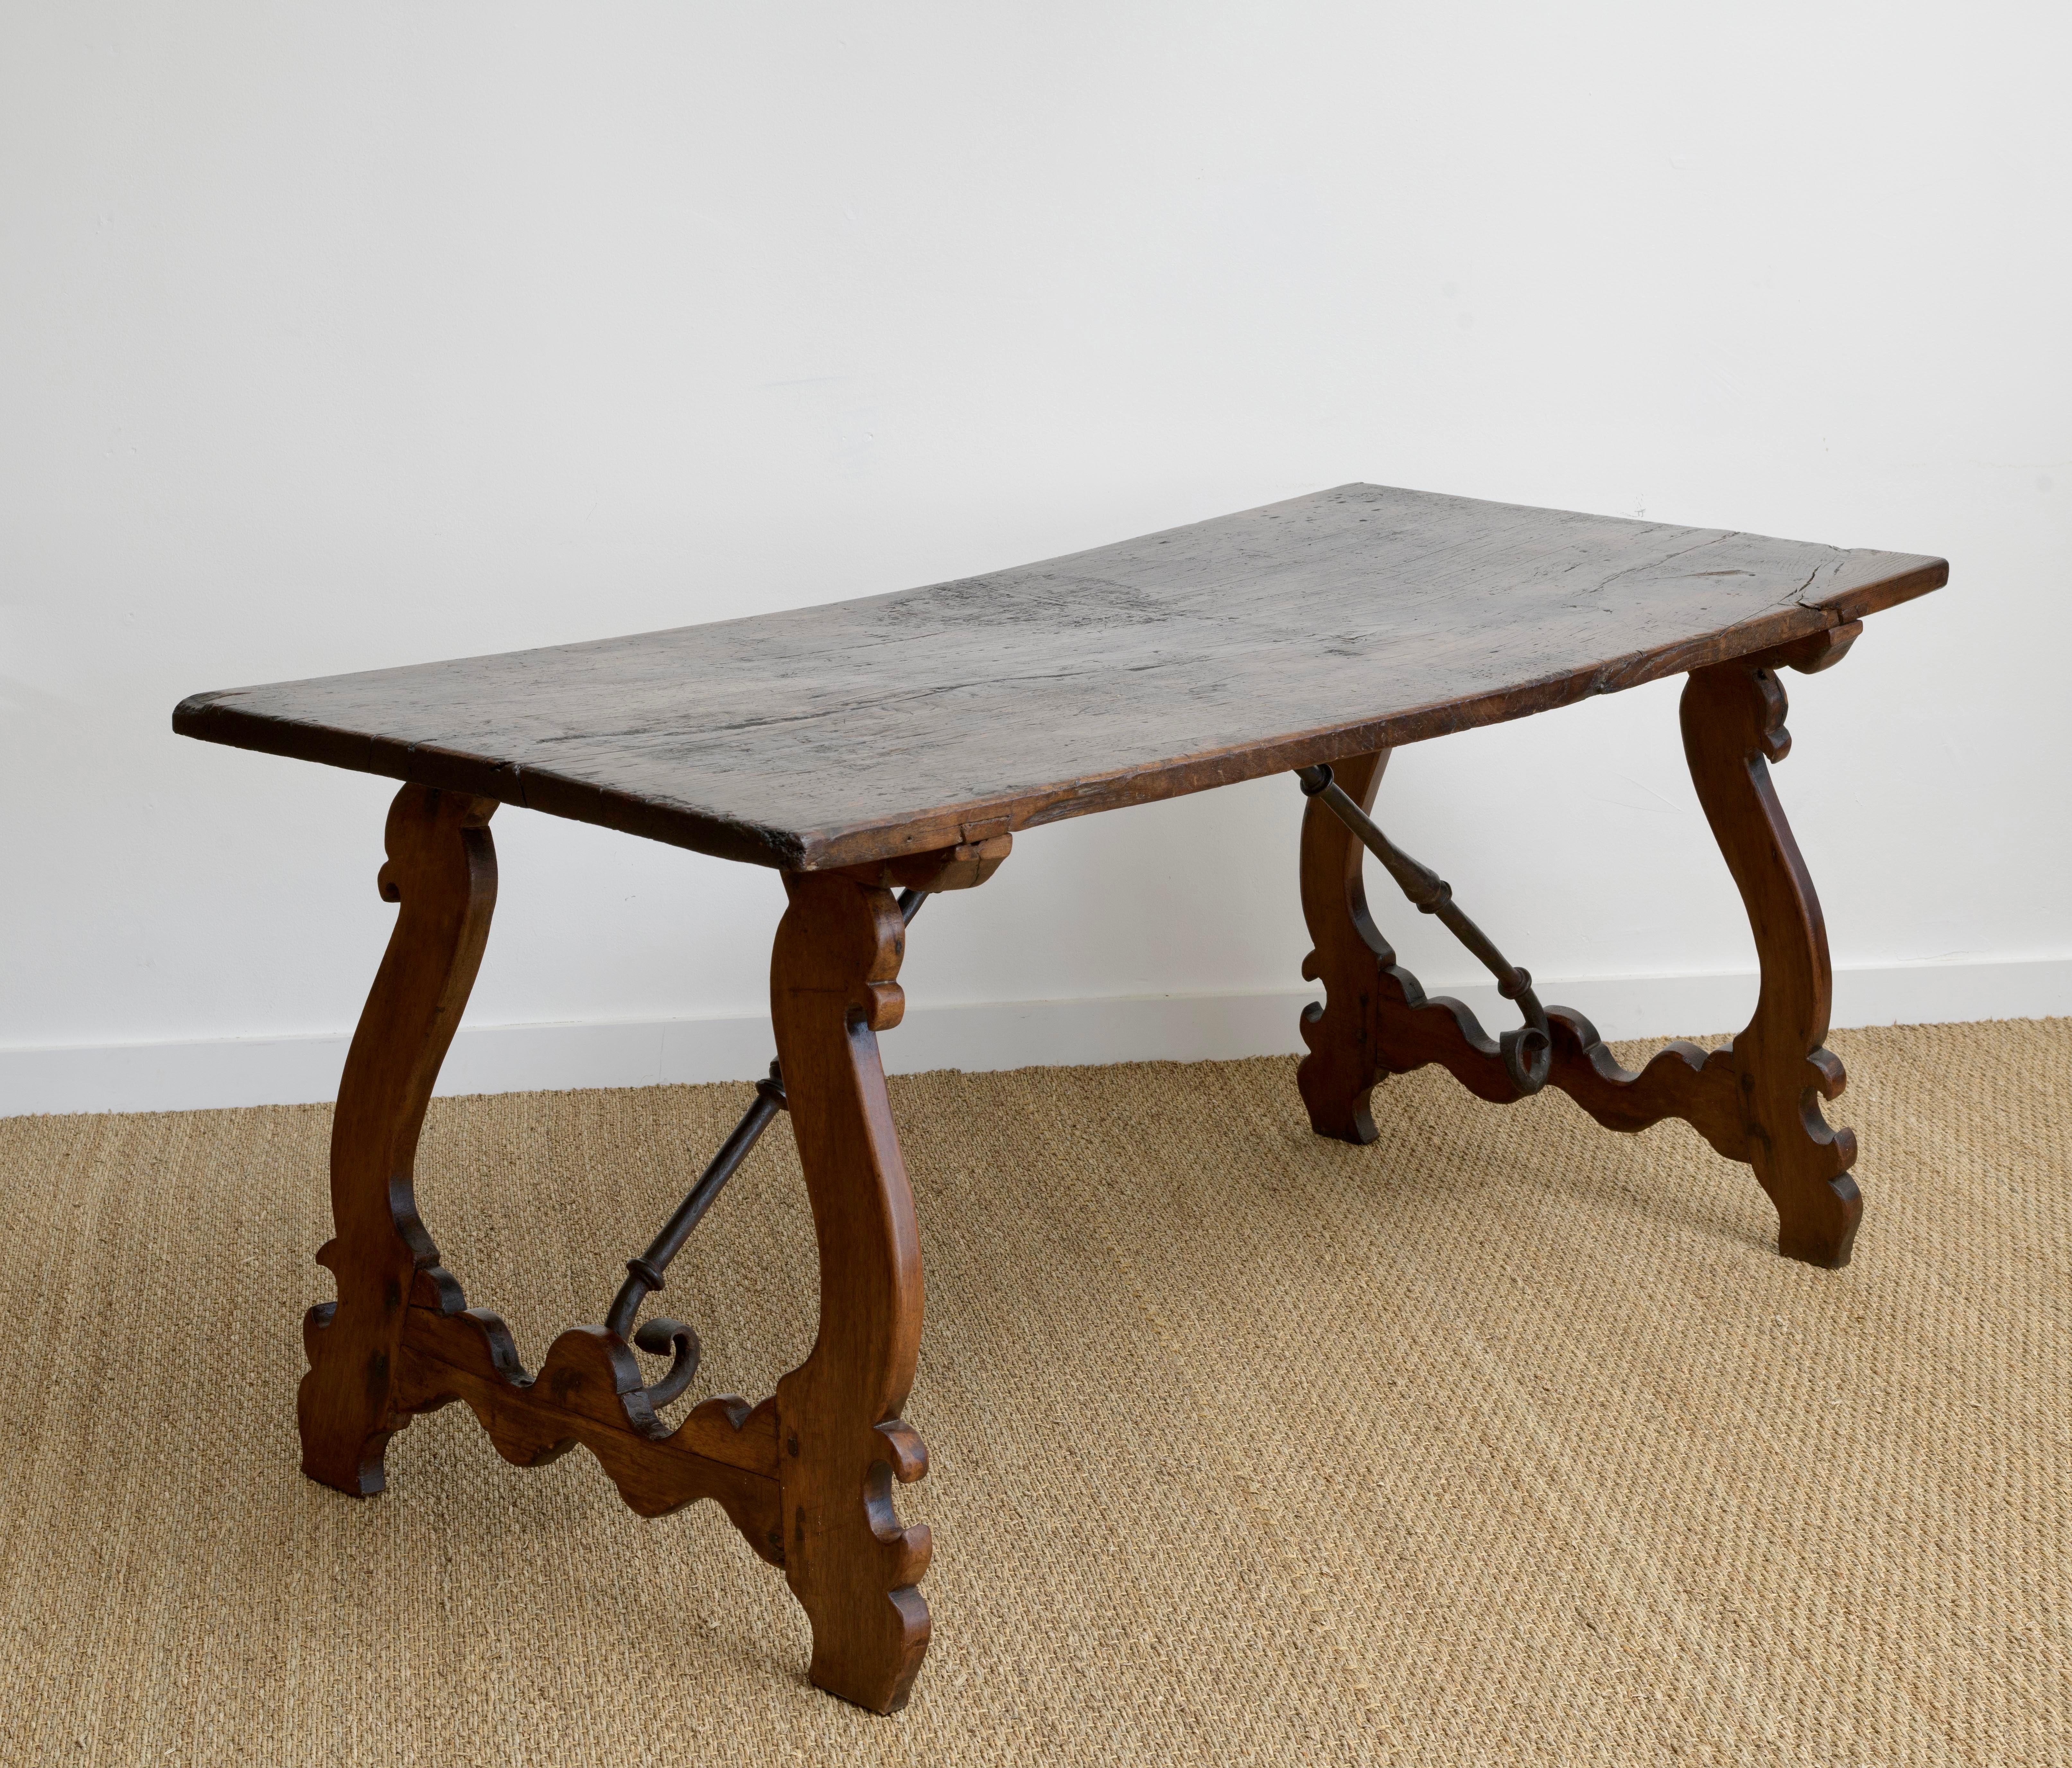 Early 18th Century Plank Top Spanish Table, splayed lyre legs, with forged iron stretchers  Top has wonderful patina consistent with daily use of its age.   